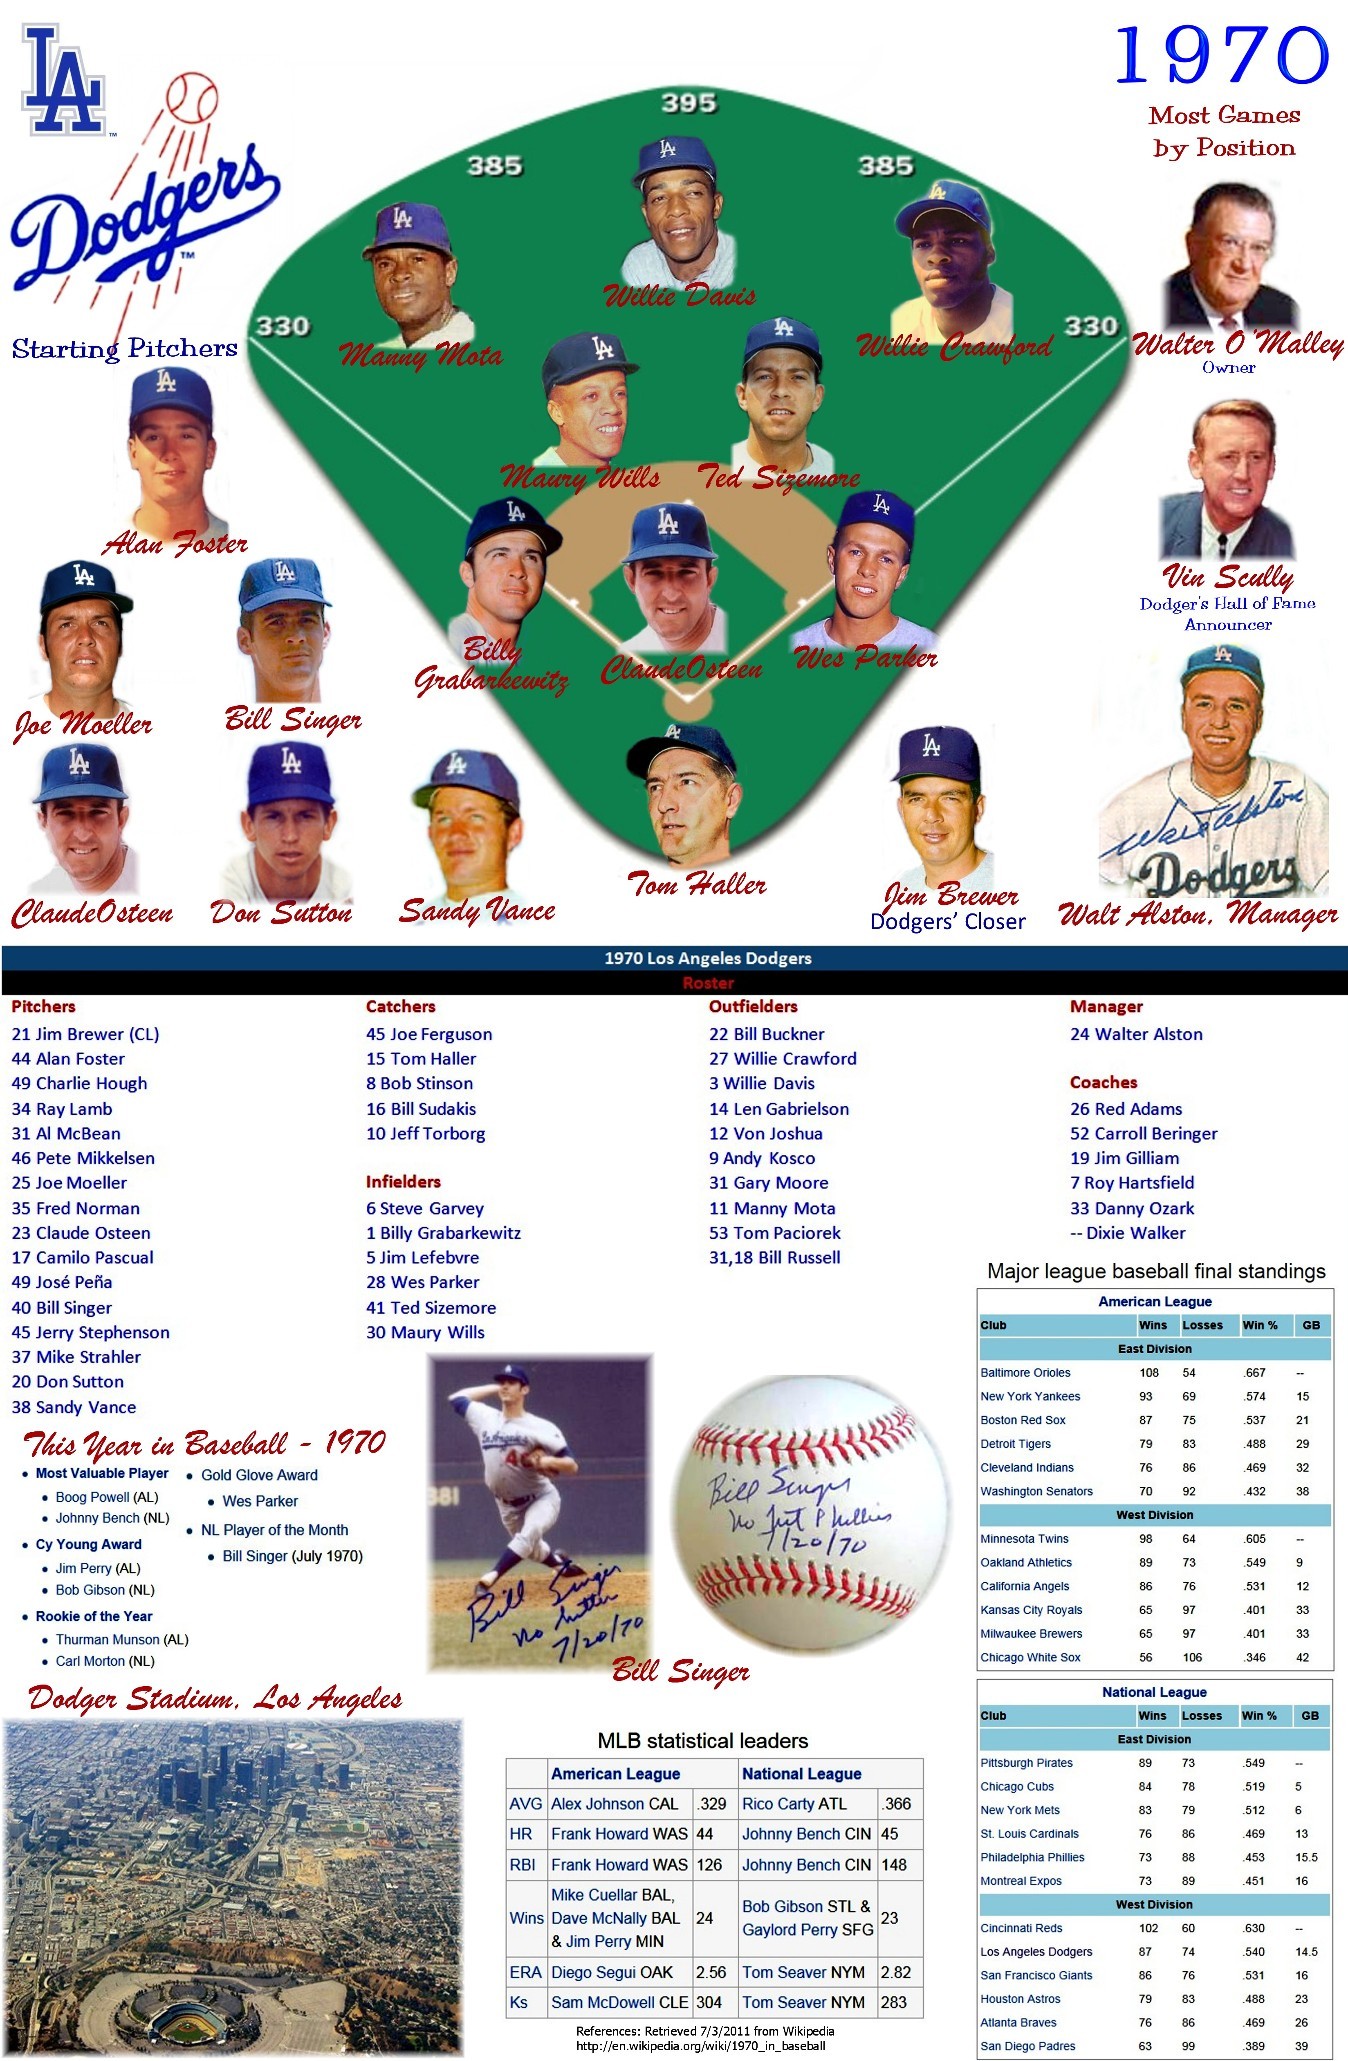 1970 Roster